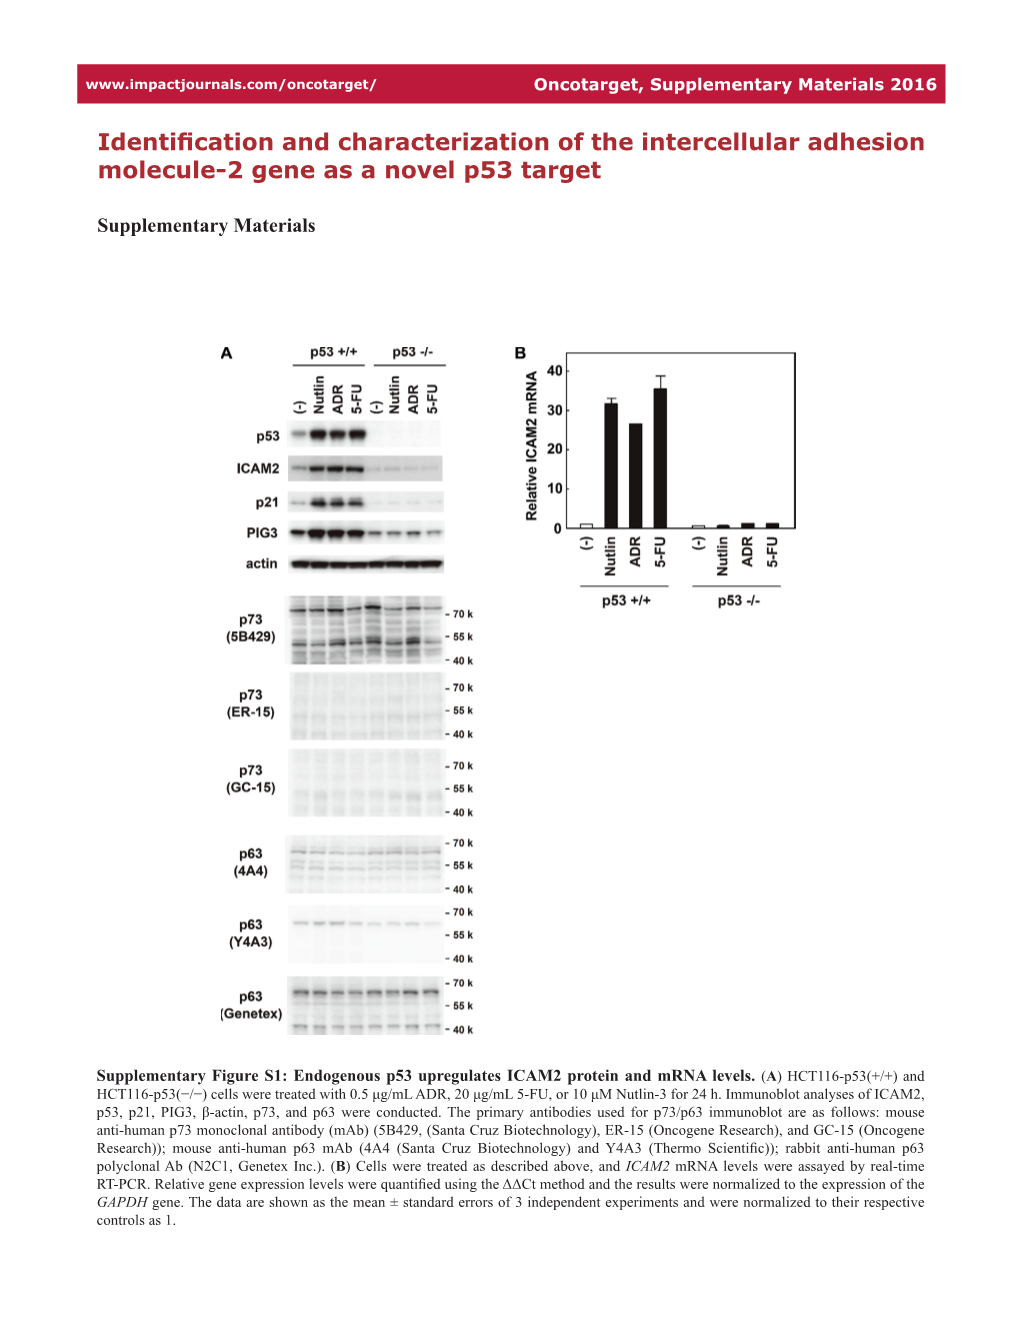 Identification and Characterization of the Intercellular Adhesion Molecule-2 Gene As a Novel P53 Target